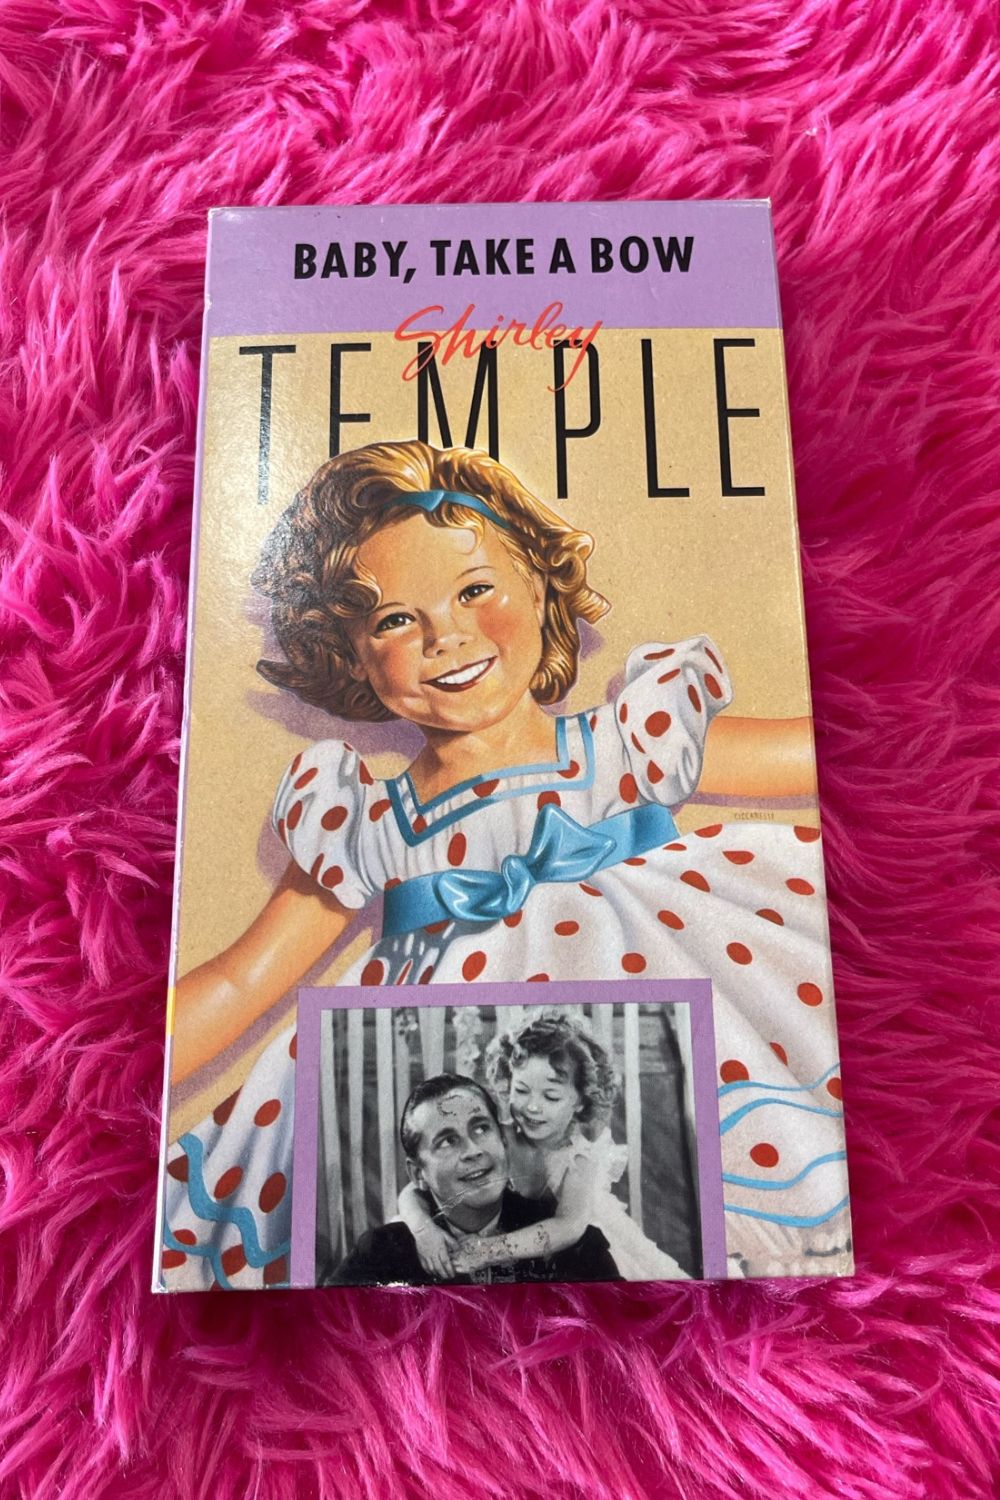 SHIRLEY TEMPLE VHS*